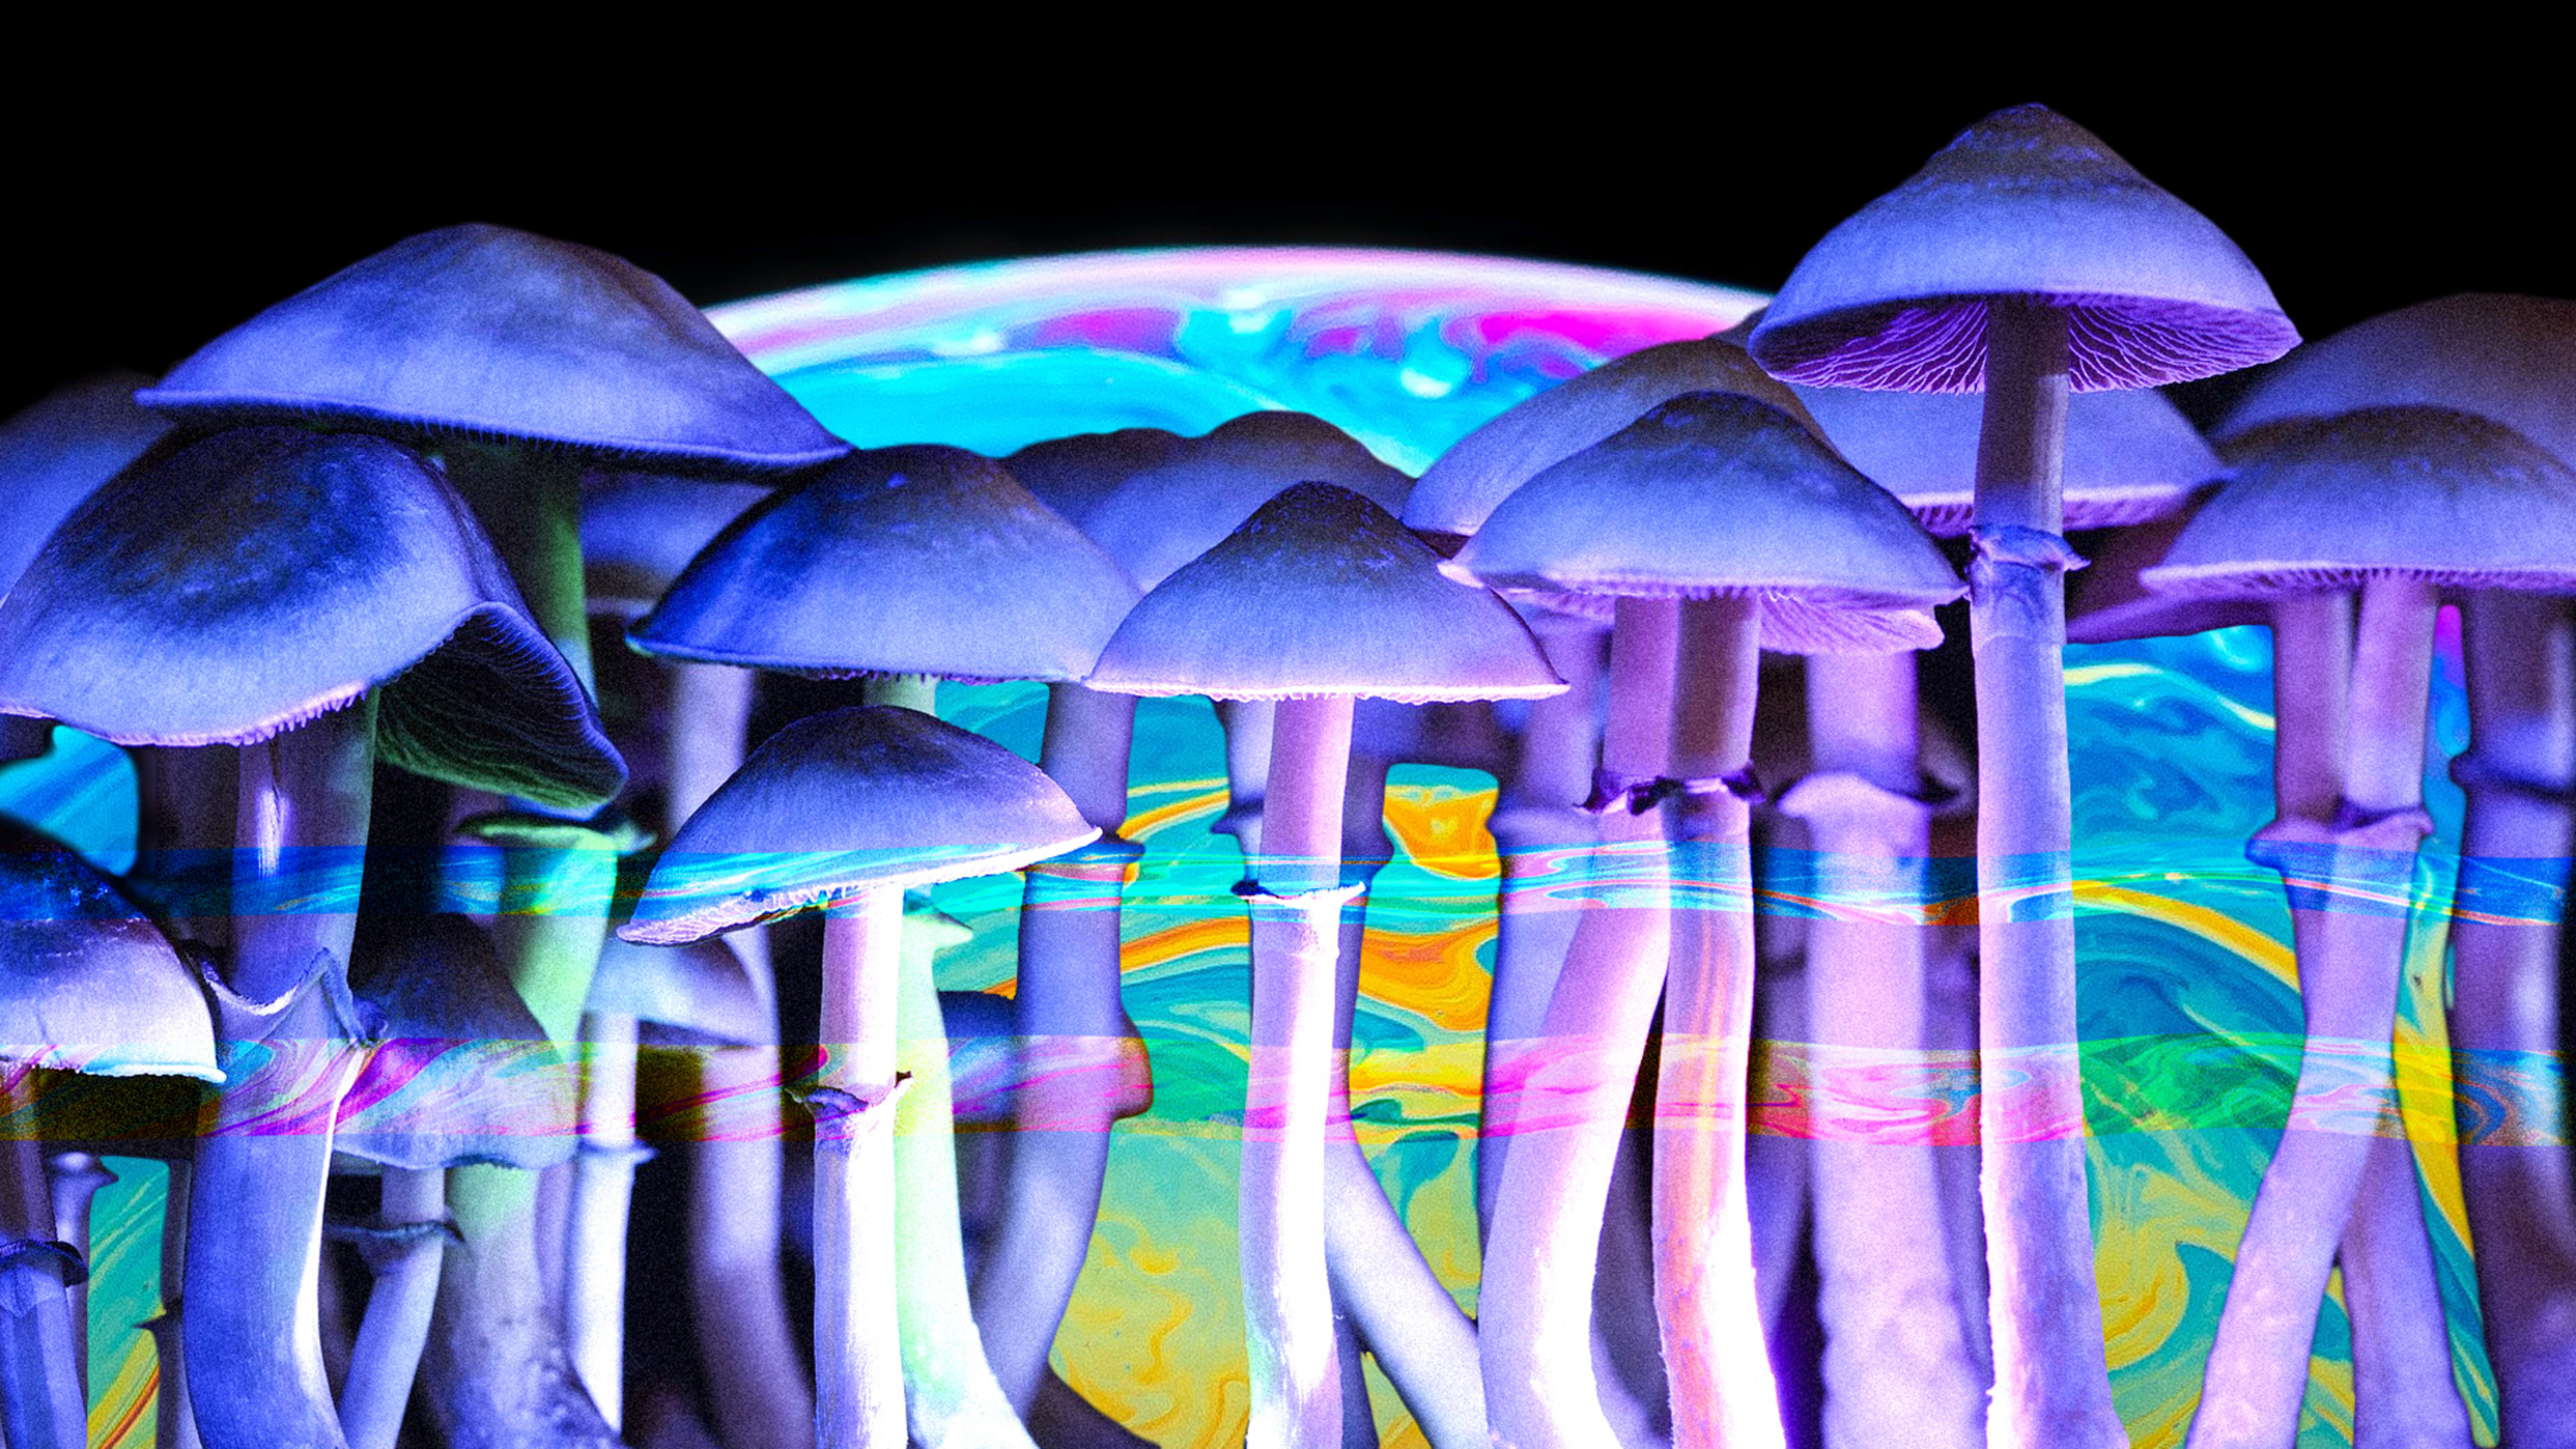 Psychedelic mushrooms win a major electoral victory, paving the way for medical use